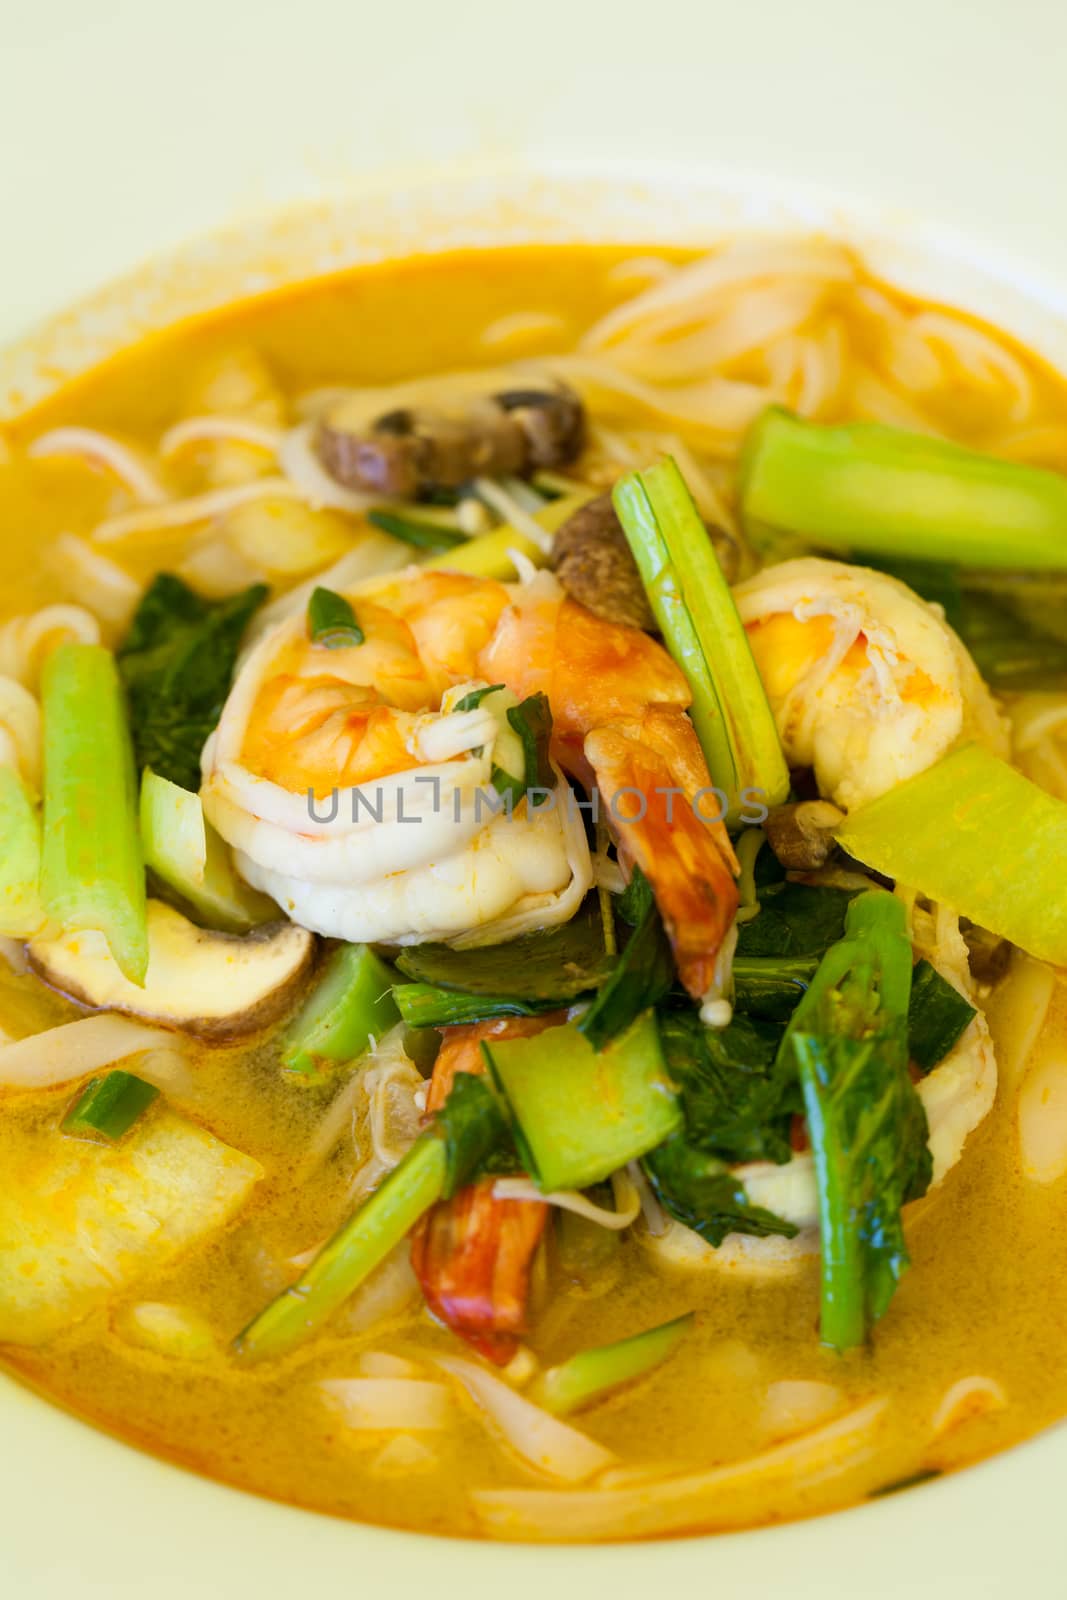 Bowl of traditional Thai tom yam soup with vegetables and prawns in a spicy aromatic broth served with chopsticks